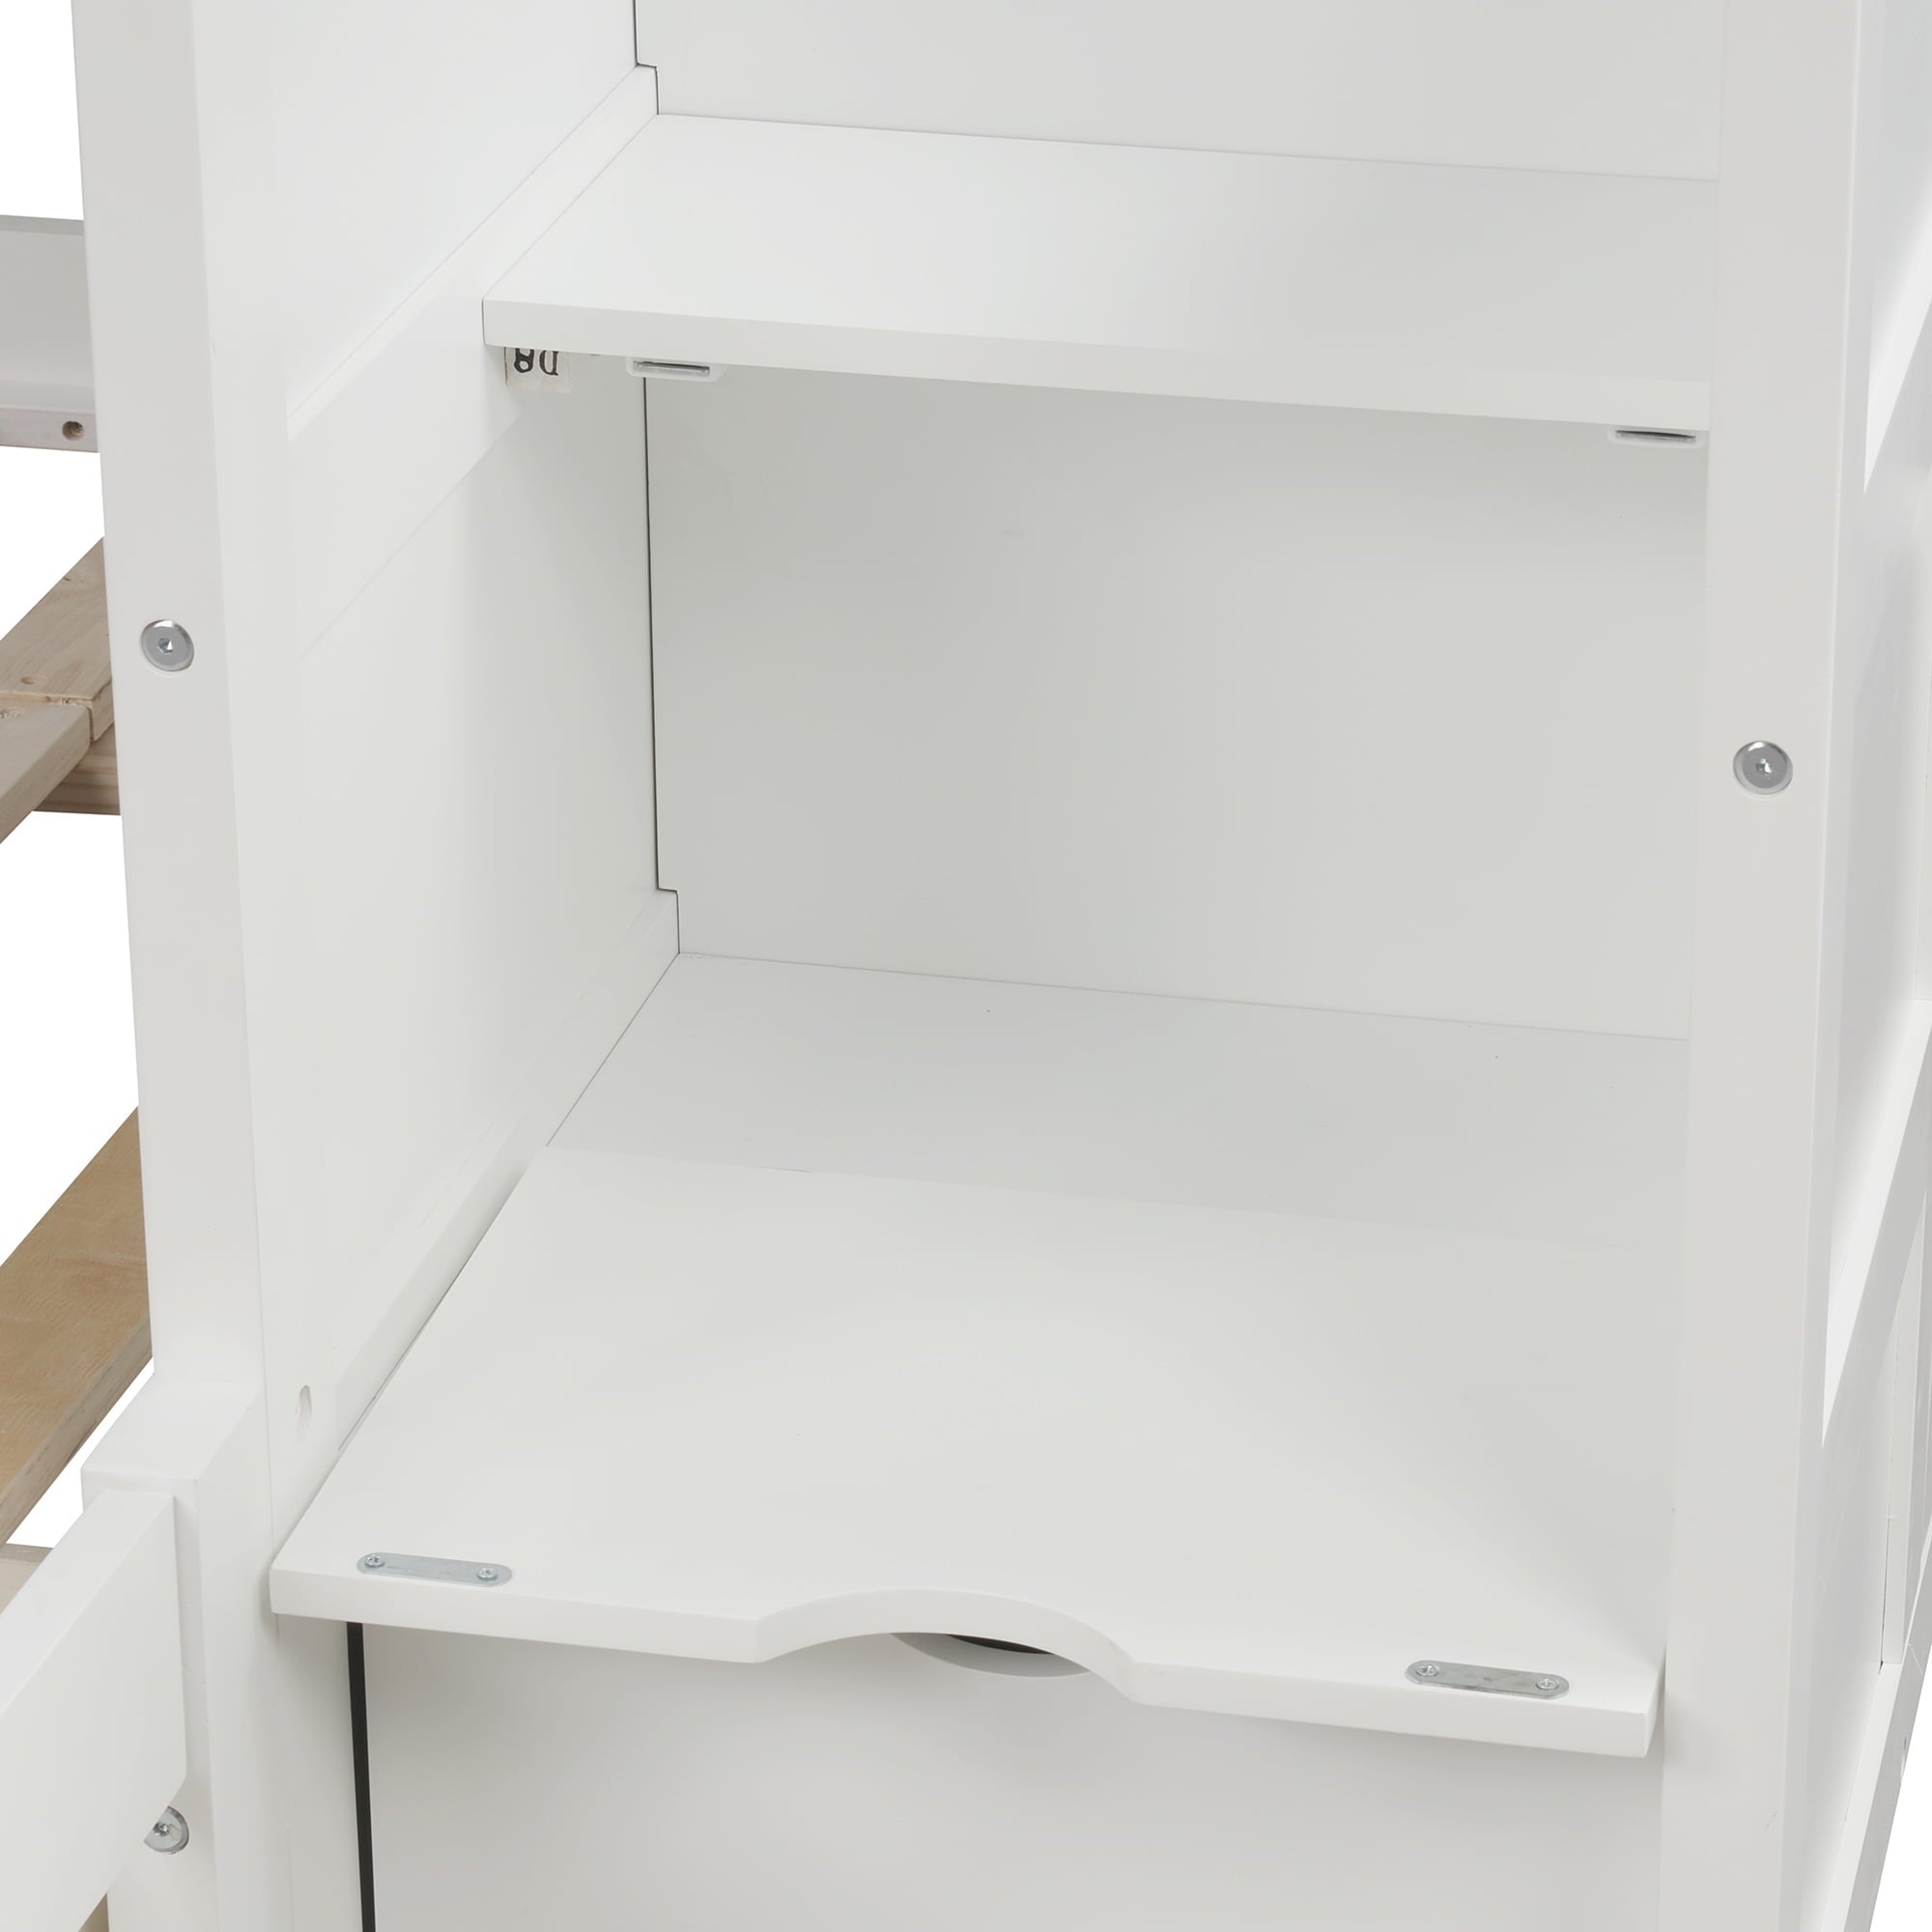 Modern Twin Bunk Bed with Drawer and Cabinet for Kids Bedroom, White